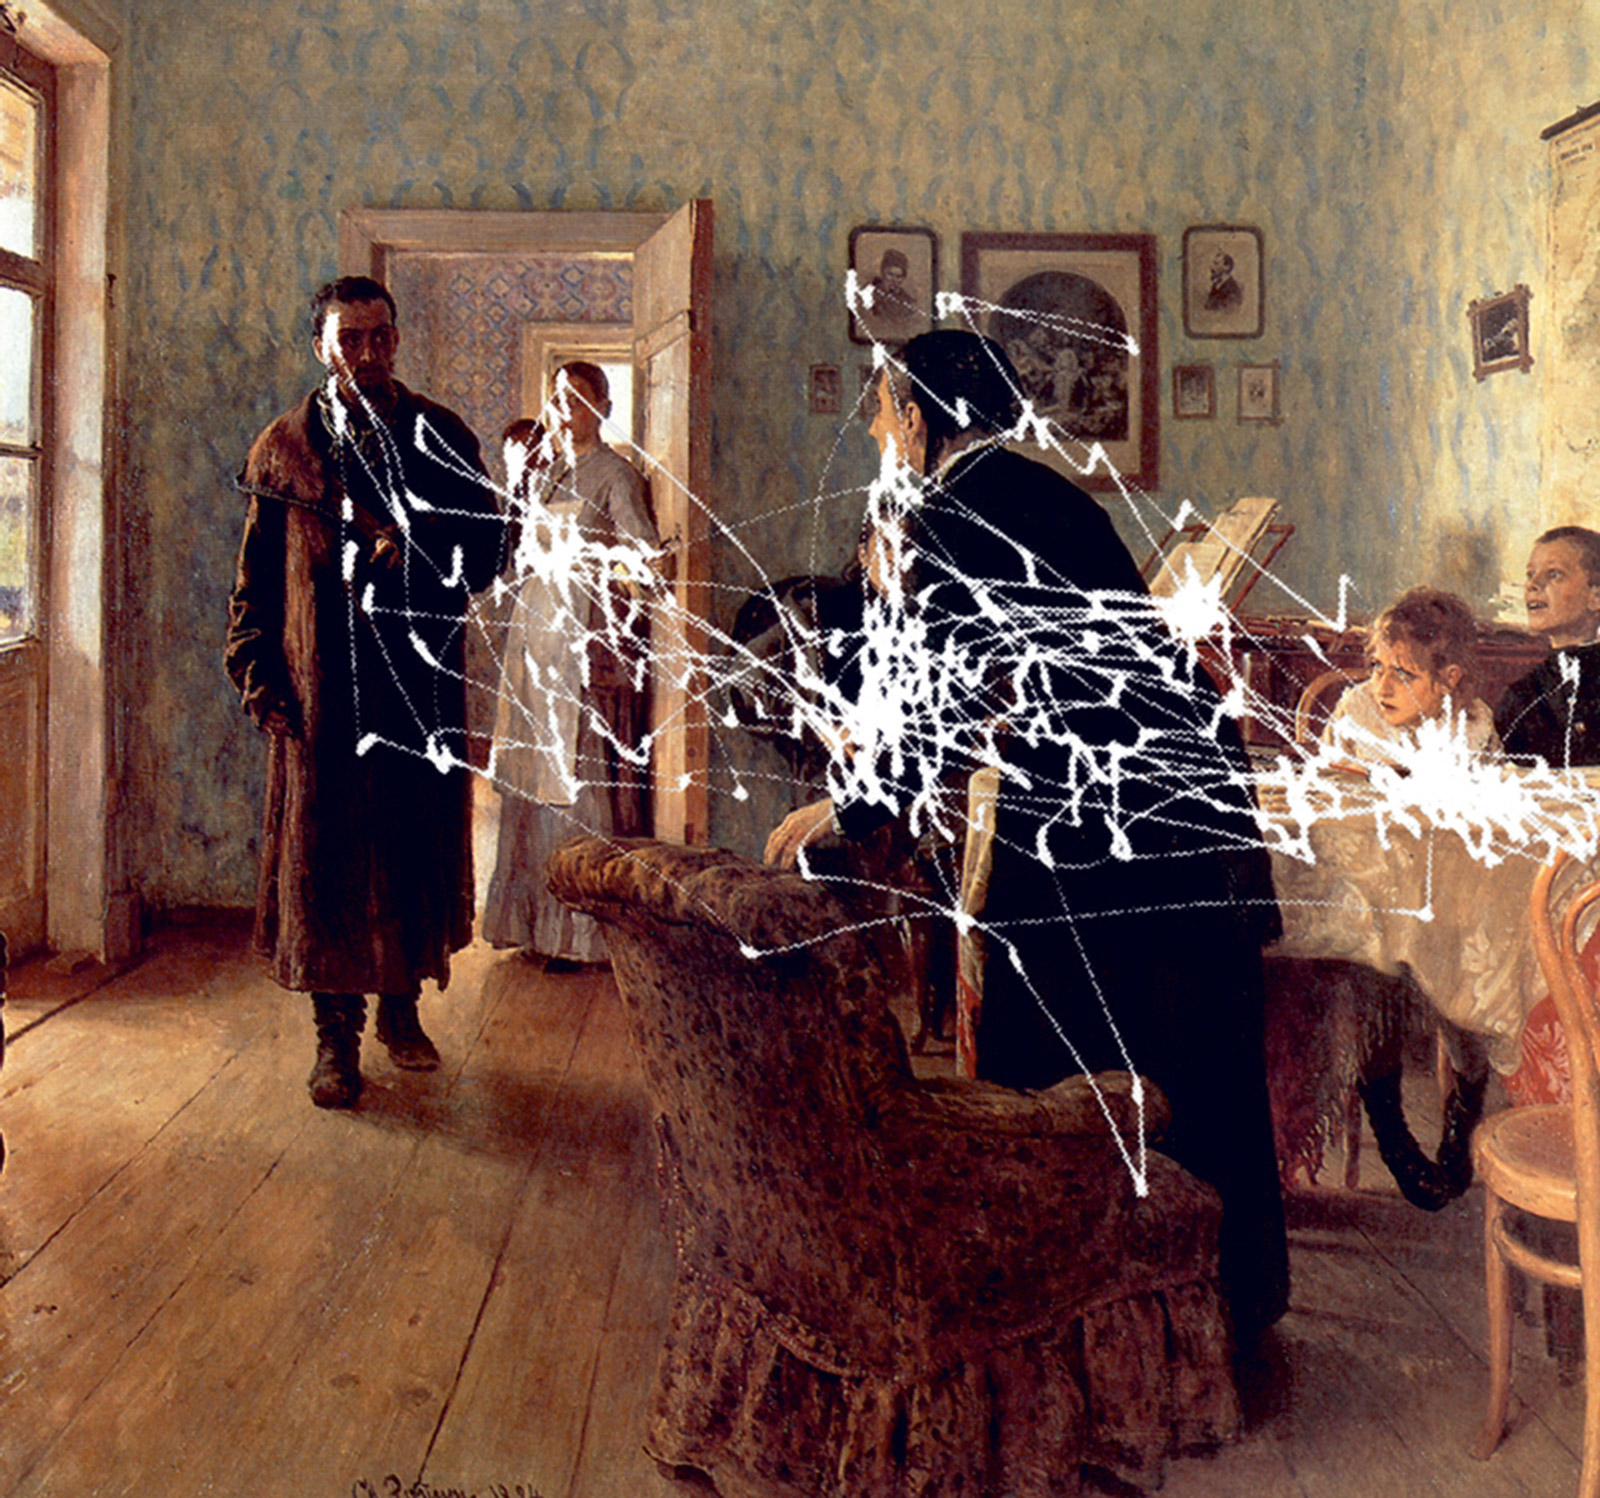 Ilya Repin’s eighteen eighty-four painting titled “An Unexpected Visitor,” marked with white lines that map the eye movements of a single subject asked by Yarbus to determine the activities of the family prior to the visitor’s arrival.